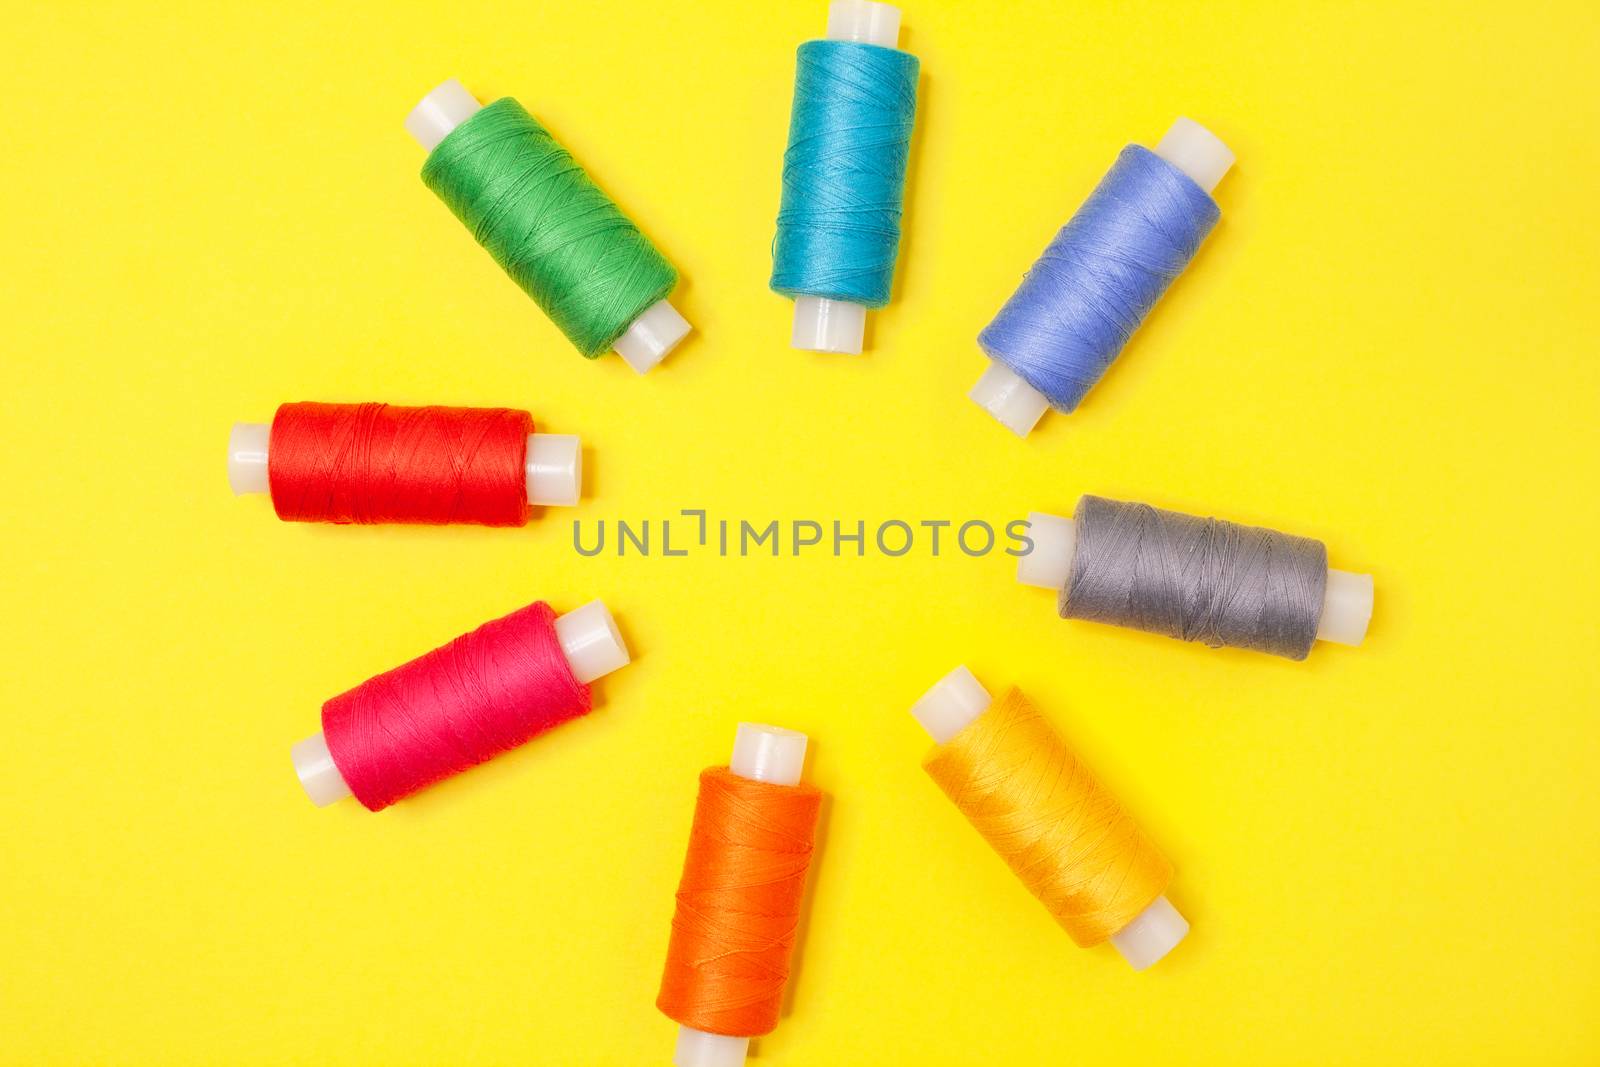 Set of multicolored spools of thread on yellow background. Accessories for needlework, embroidery, sewing. Flat lay. Top view. Objects are located in center, forming flower.